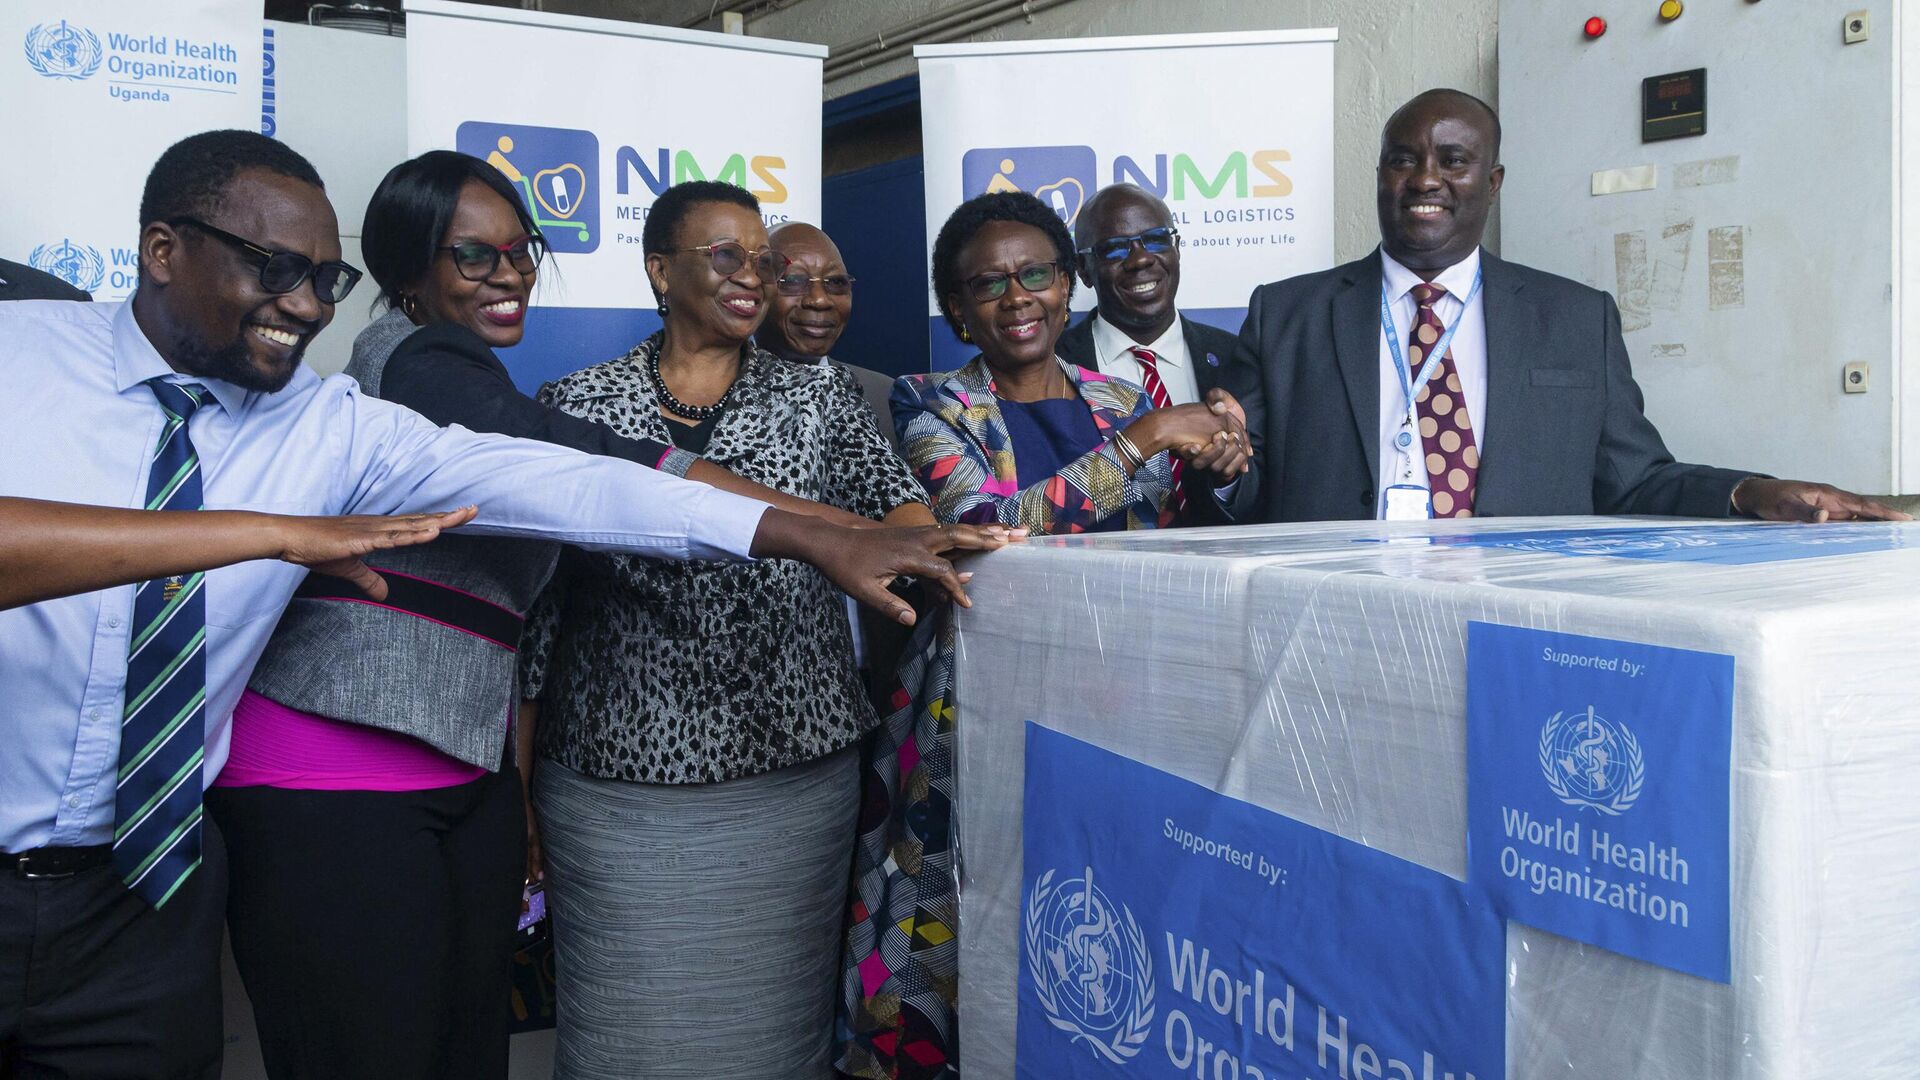 Charles Njuguna (R), the Incident Manager for the World Health Organization (WHO) Country Office in Uganda, and Uganda's Health Minister Jane Ruth Aceng (3rd R) pose in Entebbe on December 08, 2022 as they receive 1200 doses of Ebola trial vaccine at National Medical Stores. - Sputnik International, 1920, 11.01.2023